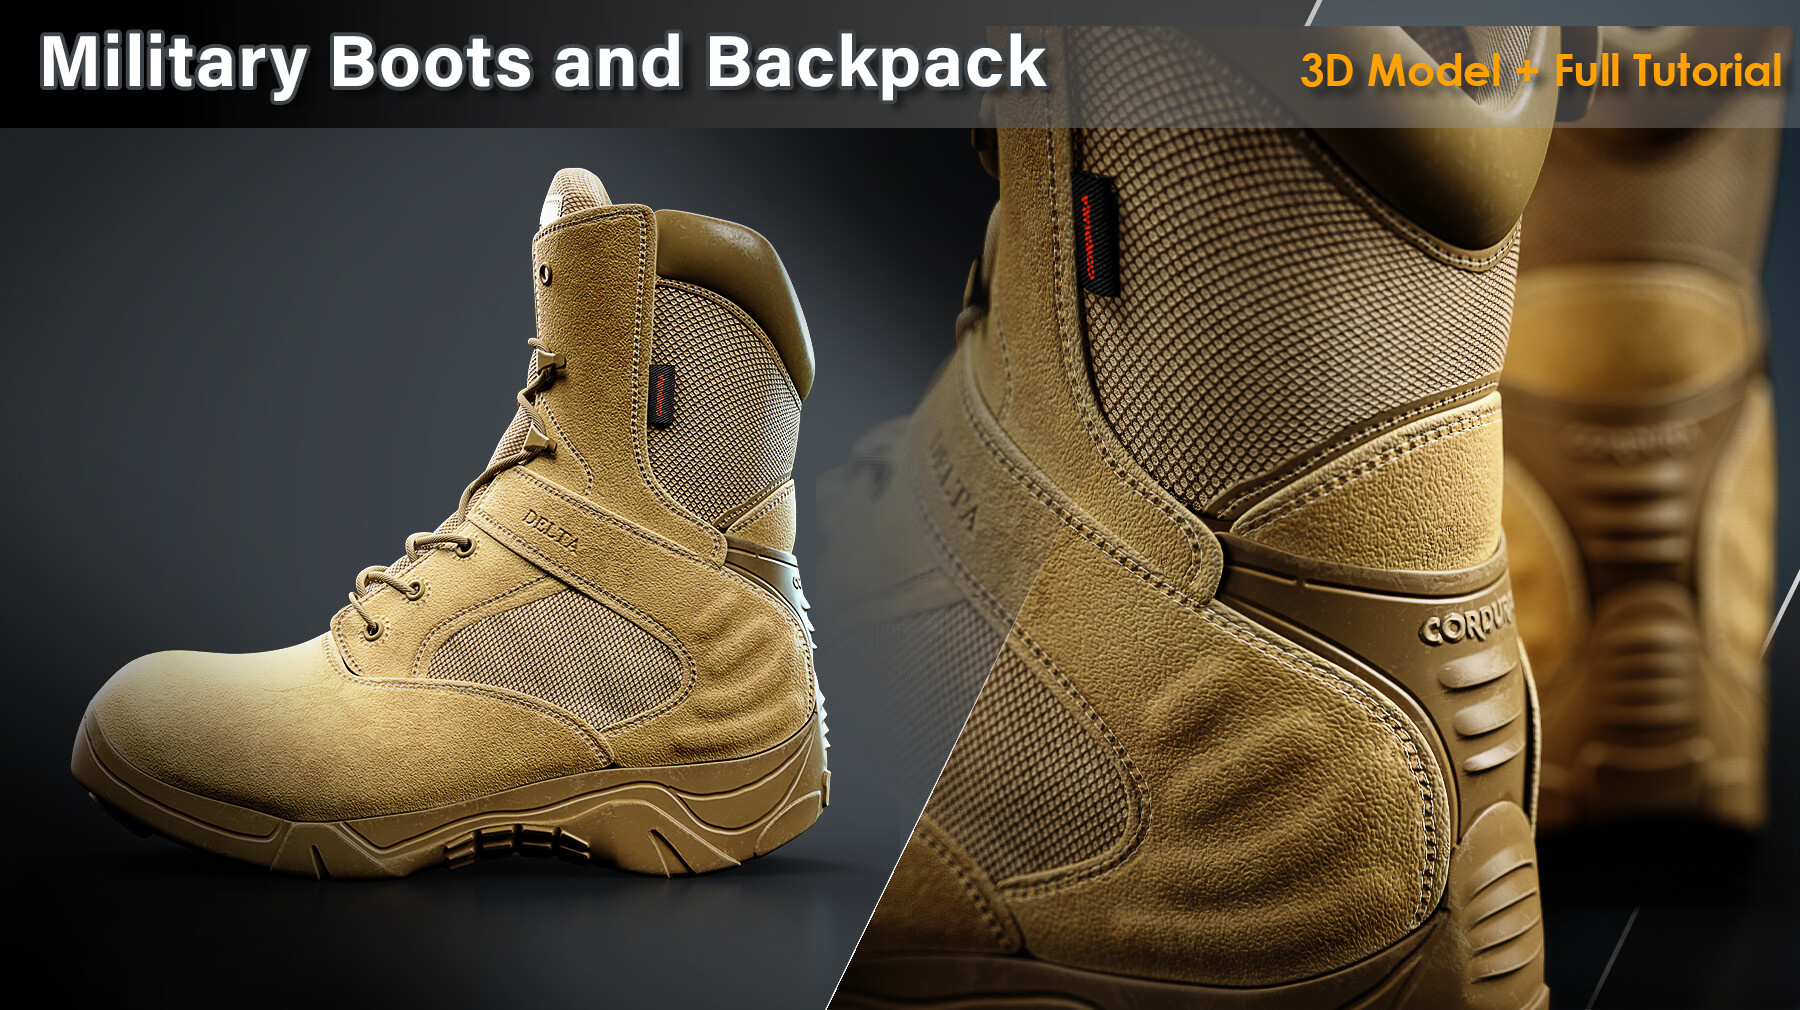 ArtStation - Military Boots and Backpack / 3D Model + Full Tutorial ...